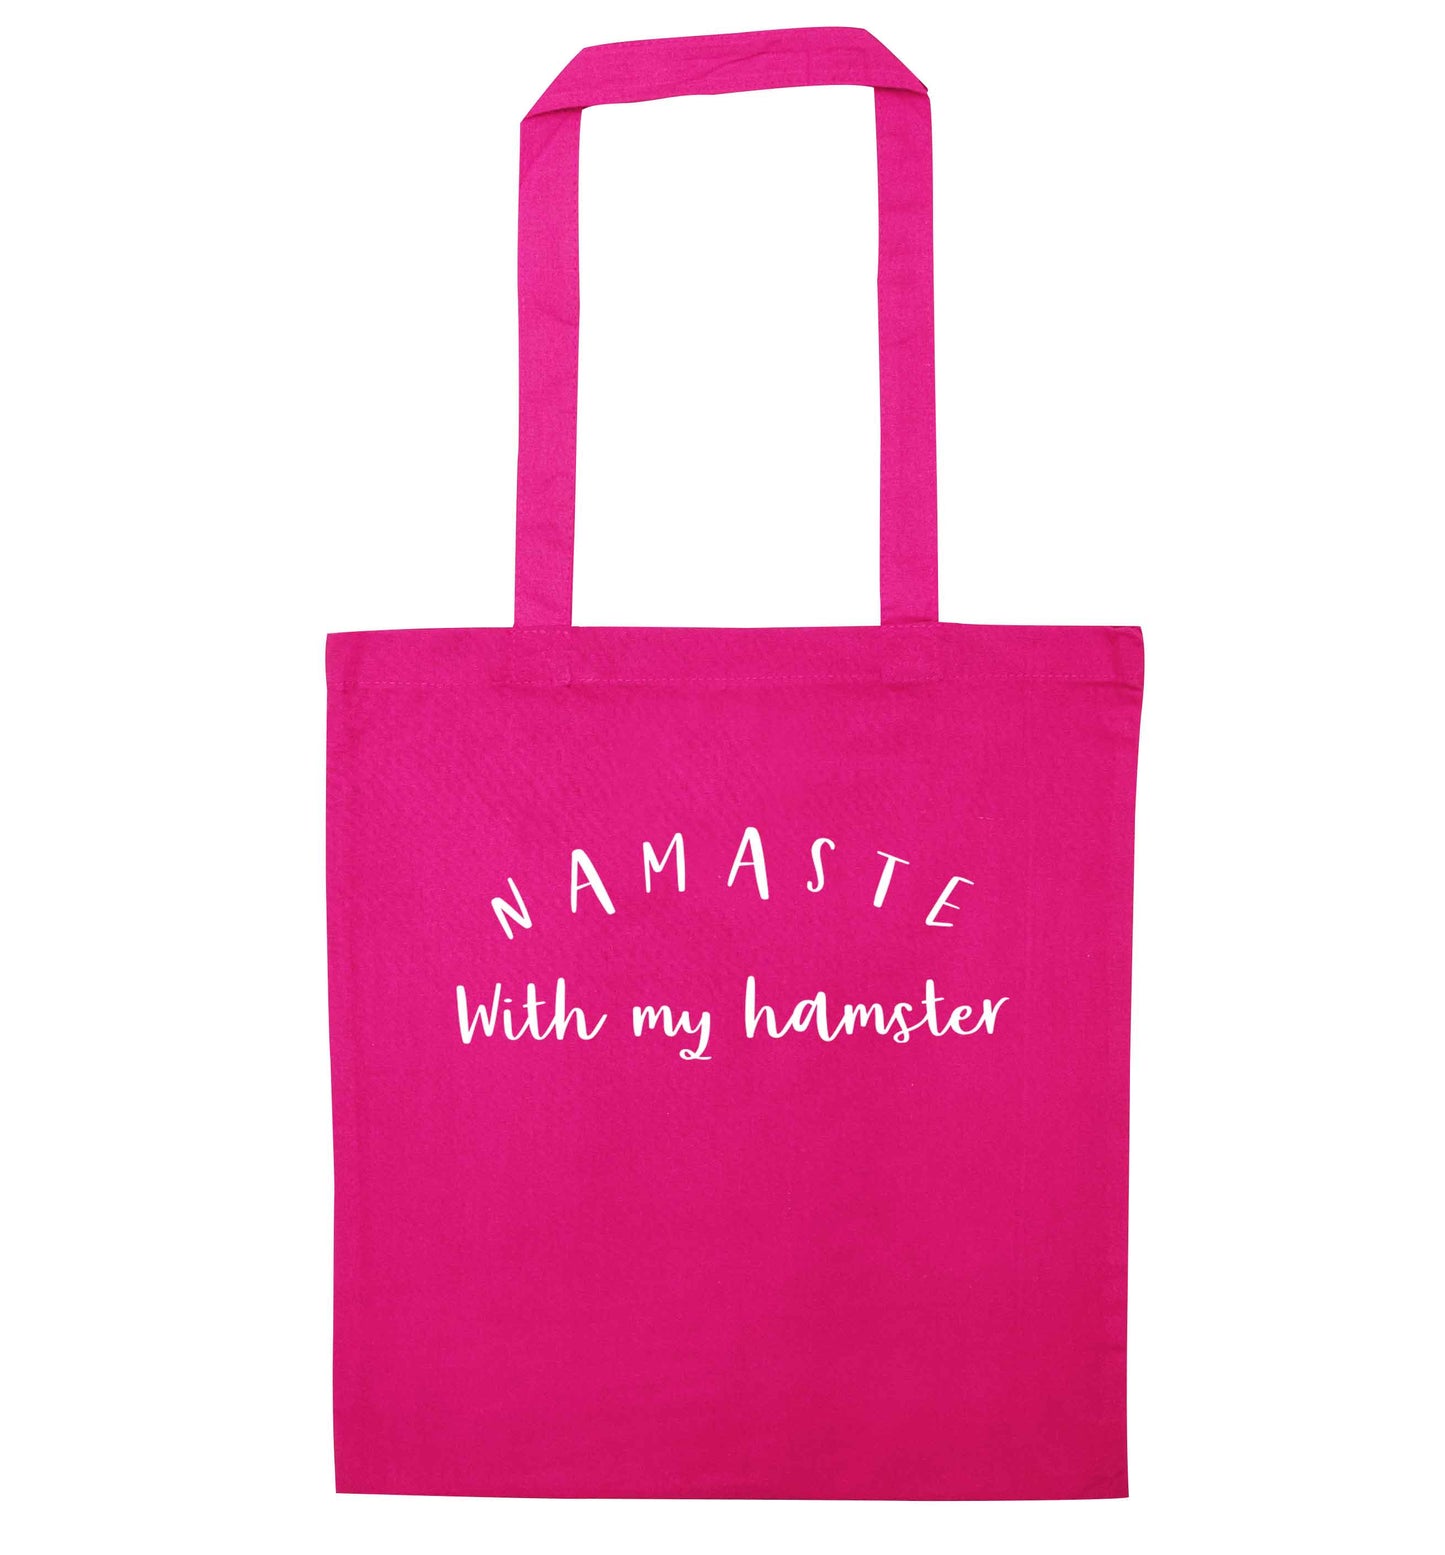 Namaste with my hamster pink tote bag